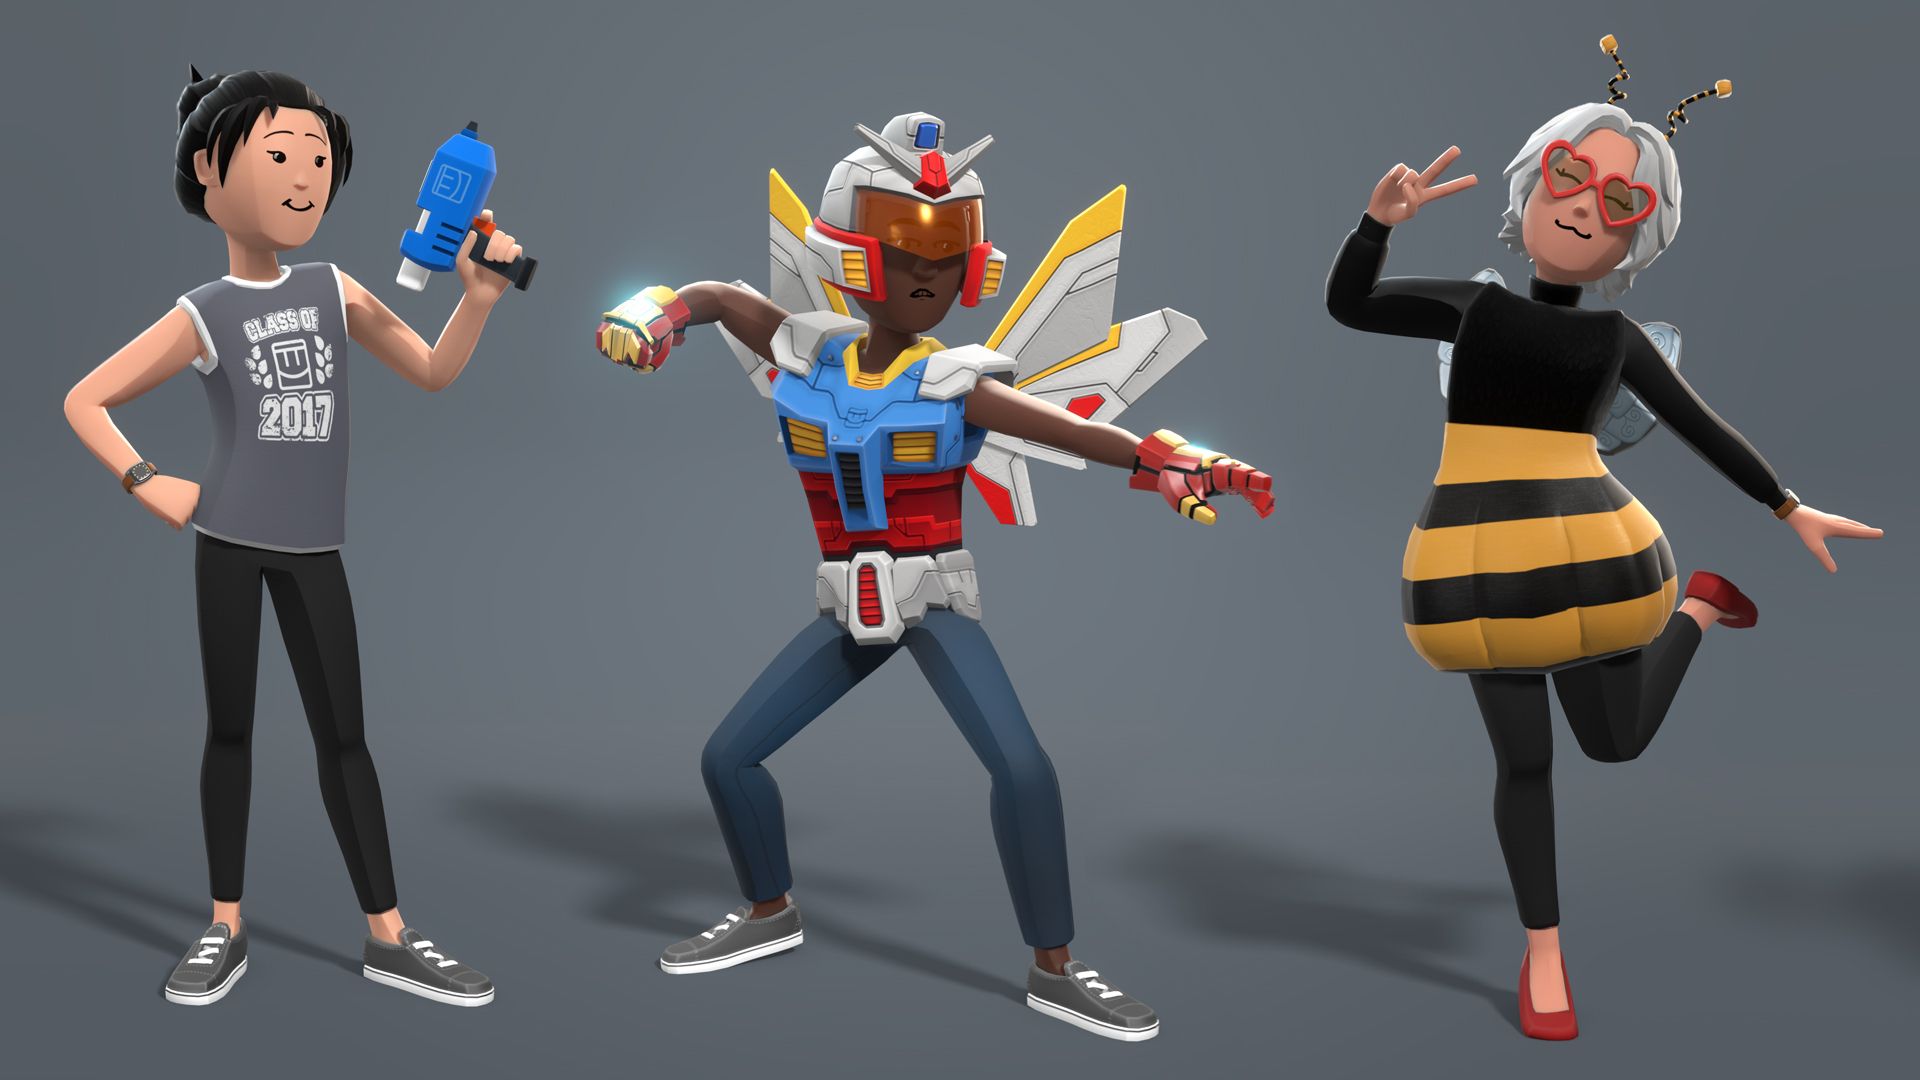 ‘Rec Room’ to Roll Out Full-body Avatars in March